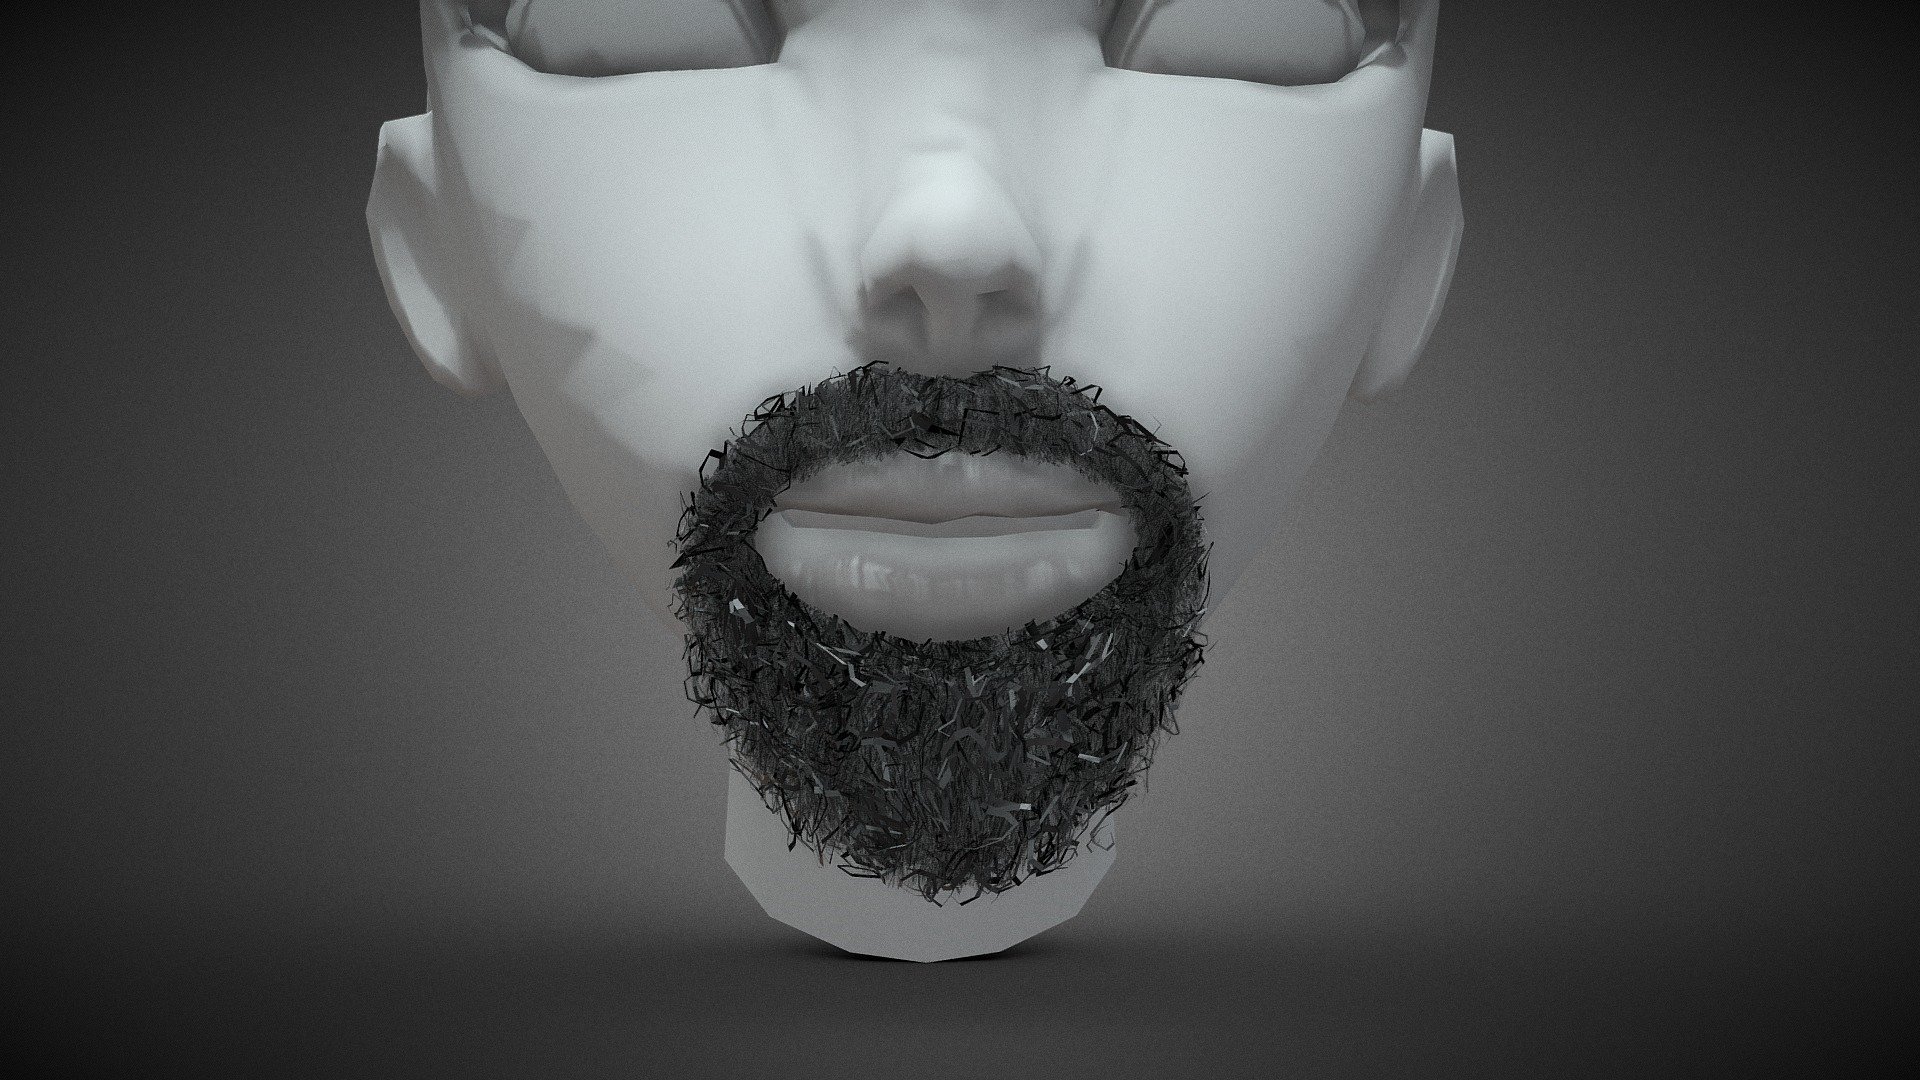 CG StudioX Present :
Facial Hair Cards Style 8 - Curly Circle Beard lowpoly/PBR




The photo been rendered using Marmoset Toolbag 4 (real time game engine )

The head model is decimated to show how the hair looks on the head.


Features :



Comes with Specular and Metalness PBR 4K texture .

Good topology.

Low polygon geometry.

The Model is prefect for game for both Specular workflow as in Unity and Metalness as in Unreal engine .

The model also rendered using Marmoset Toolbag 4 with both Specular and Metalness PBR and also included in the product with the full texture.

The texture can be easily adjustable .


Texture :



one set of UV for Hair [Albedo -Normal-Metalness -Roughness-Gloss-Specular-Ao&ndash;Alpha-Depth-Direction-ID-Root] (4096*4096).

Two set of UV for cap and flyaway [Albedo -Normal-Metalness -Roughness-Gloss-Specular-Alpha] (4096*4096).


Files :
Marmoset Toolbag 4 ,Maya,,FBX,glTF,Blender,OBj with all the textures.




Contact me for if you have any questions.
 - Facial Hair Cards Style 8 - Curly Circle Beard - Buy Royalty Free 3D model by CG StudioX (@CG_StudioX) 3d model